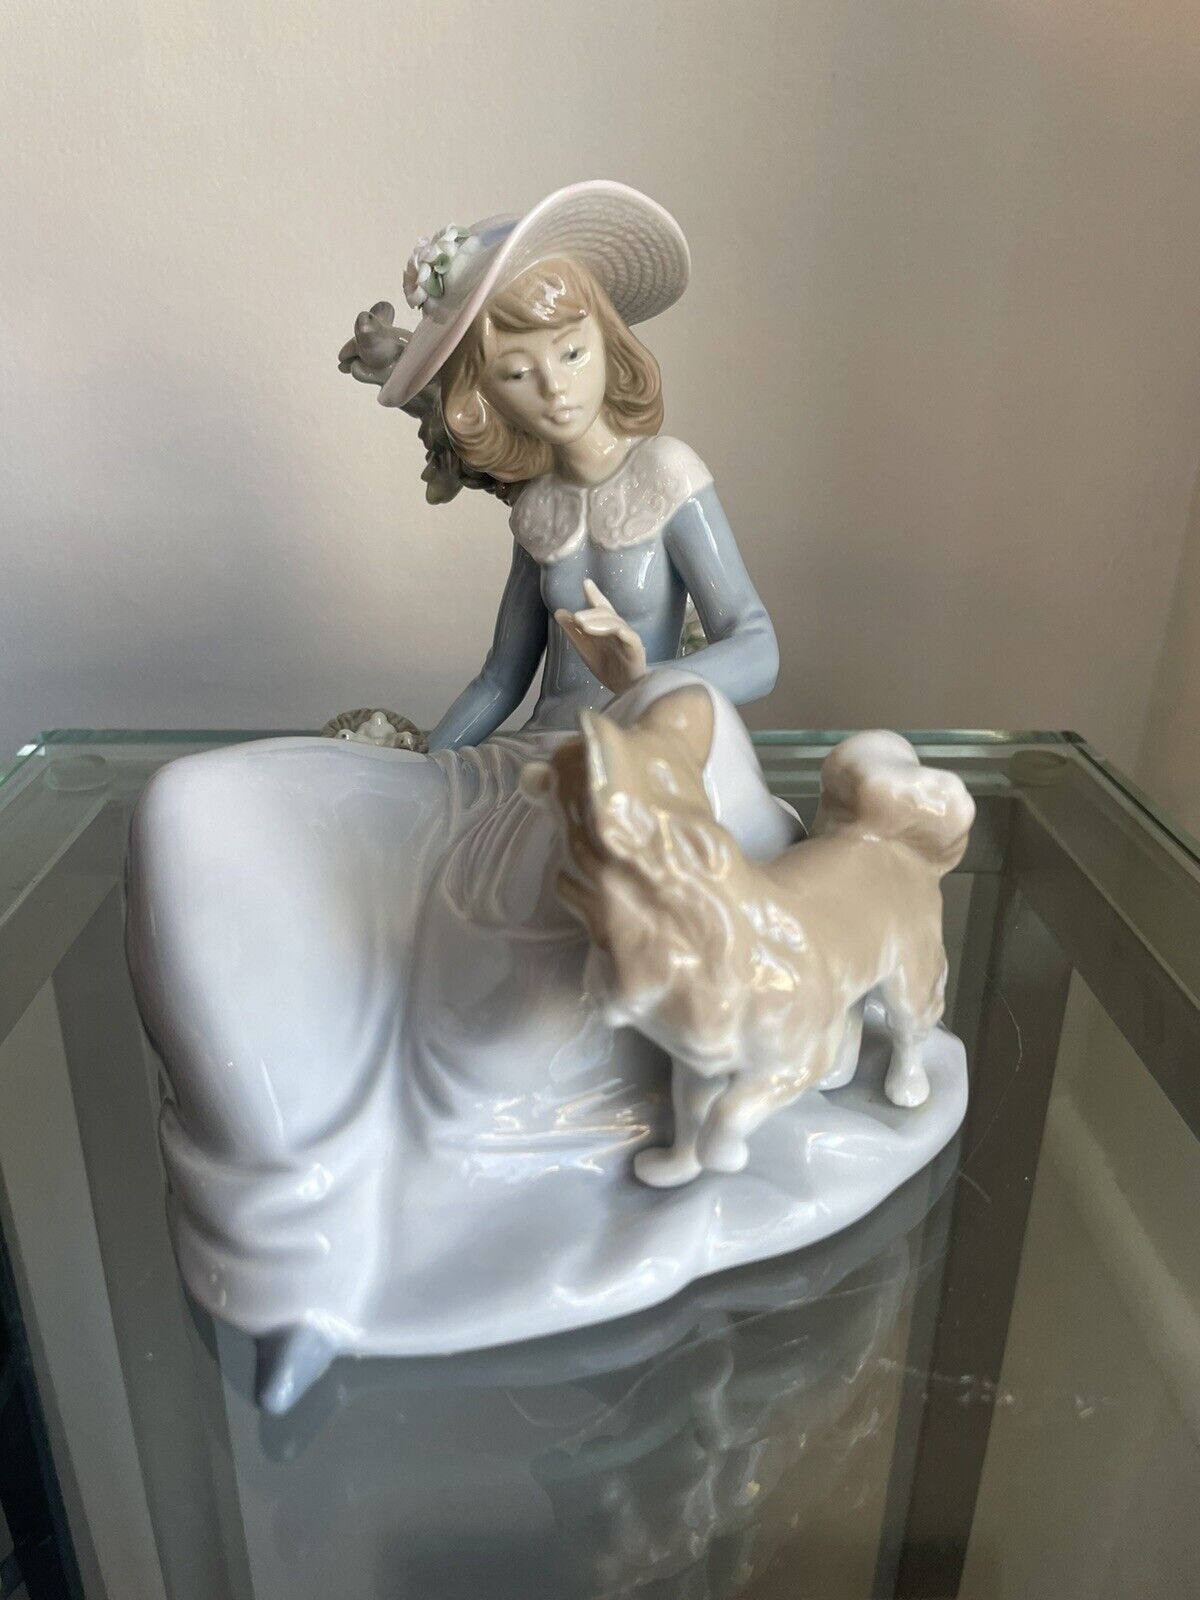 Lladro Collectible Figurine “Not Too Close” Rare